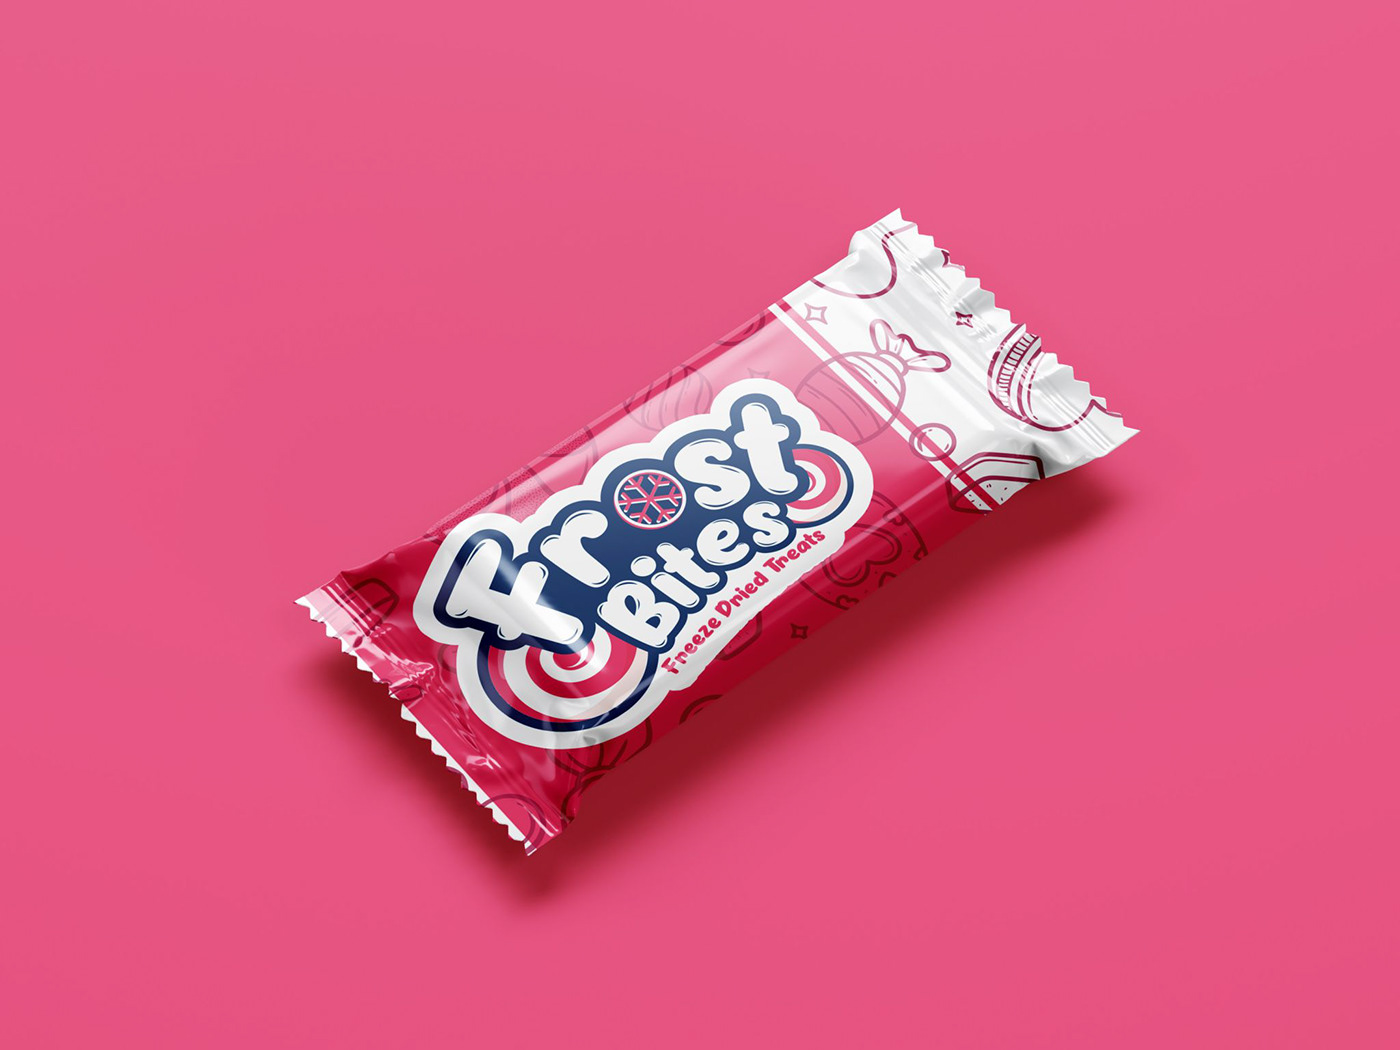 Branding Design for Frost bite Candy company.